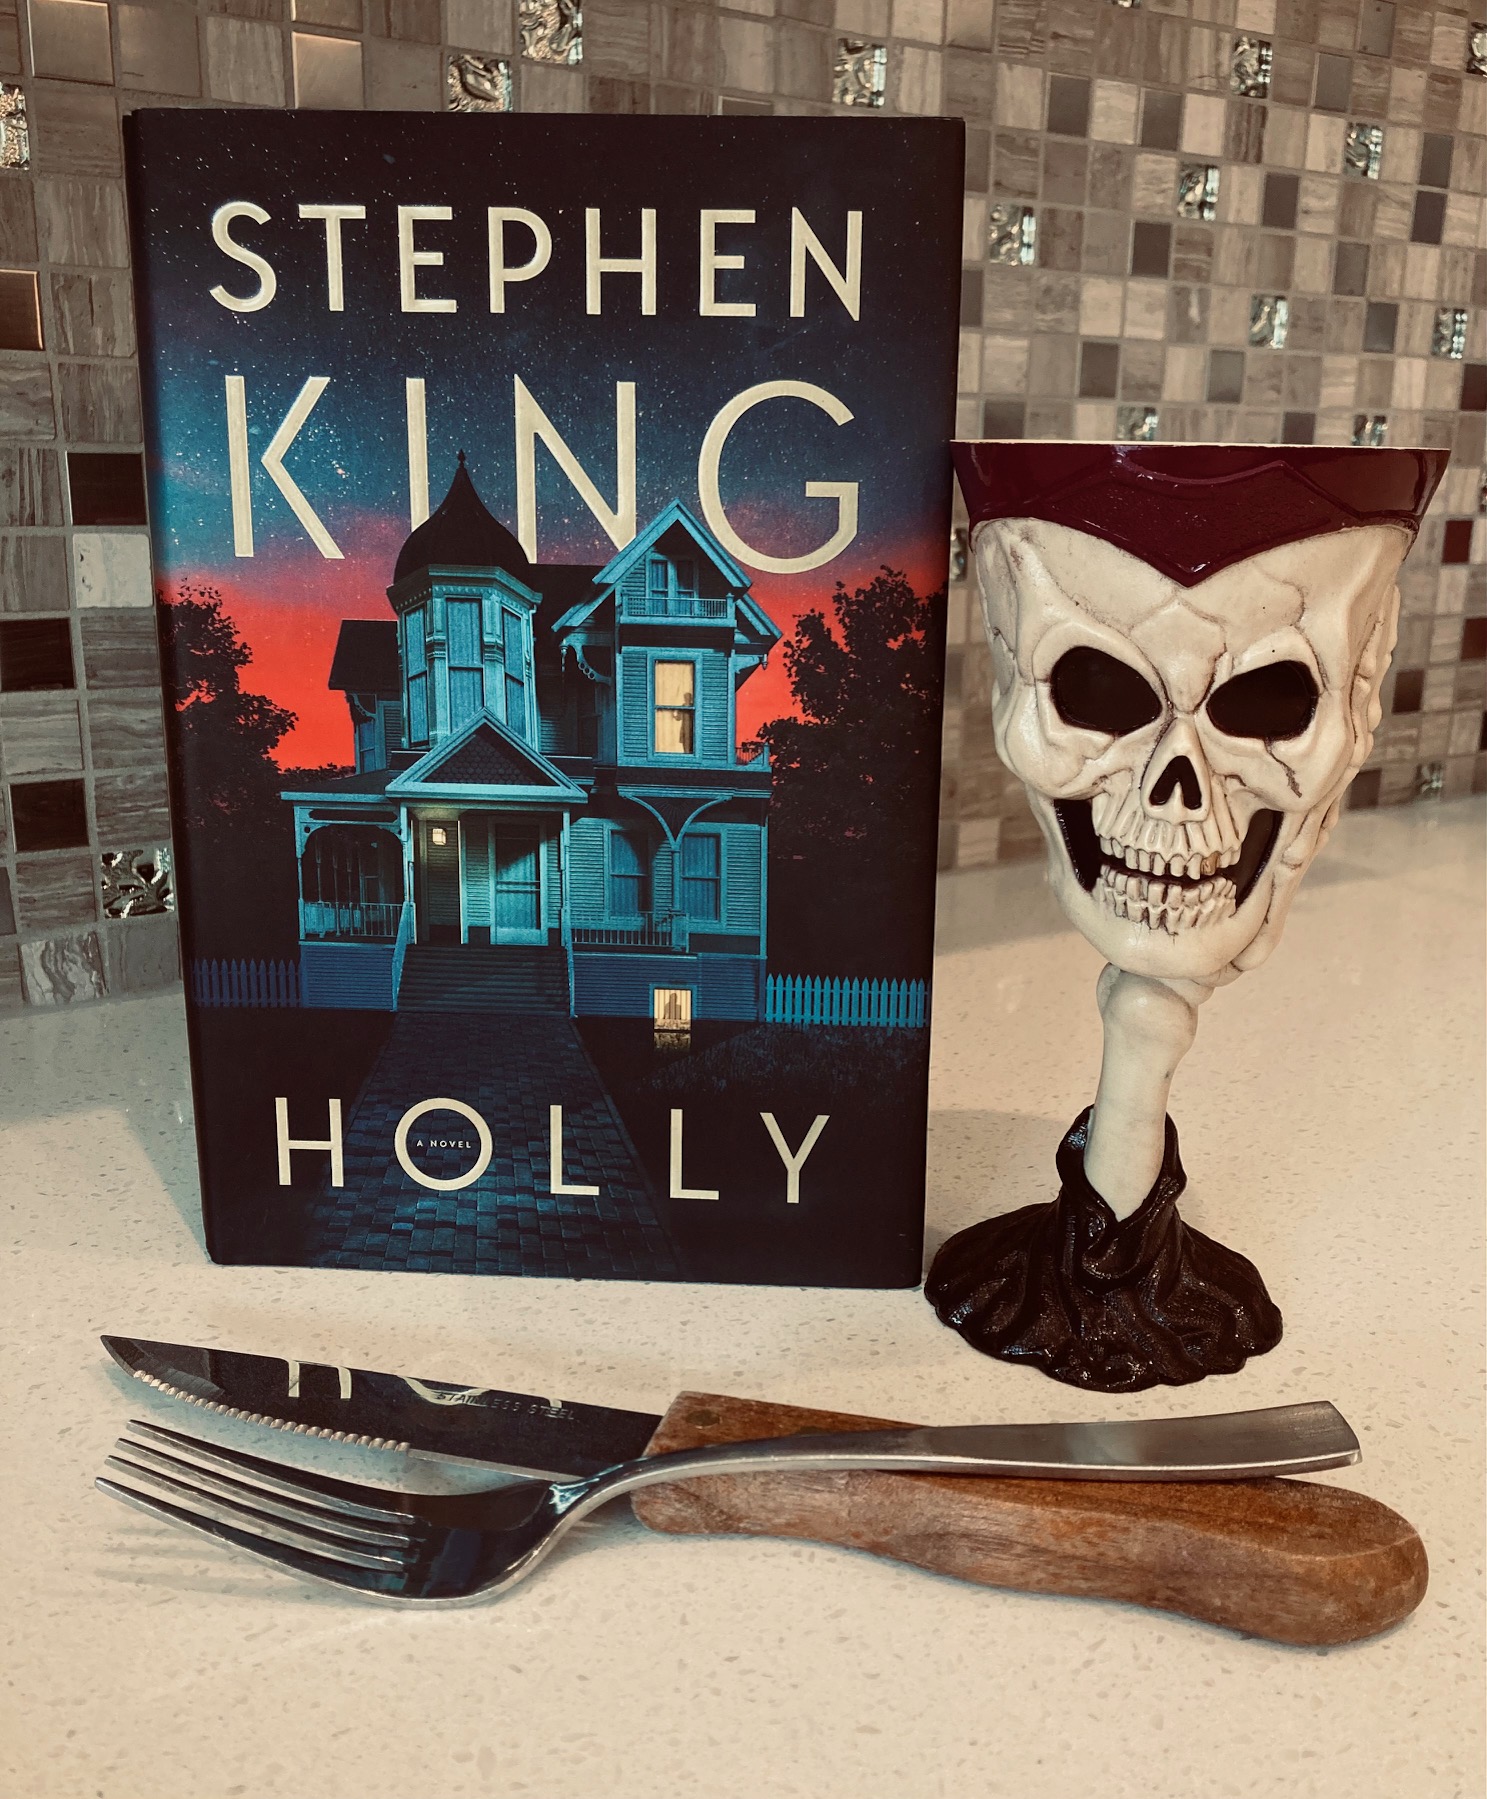 Holly by Stephen King book pictured beside a skull cup and knife and fork